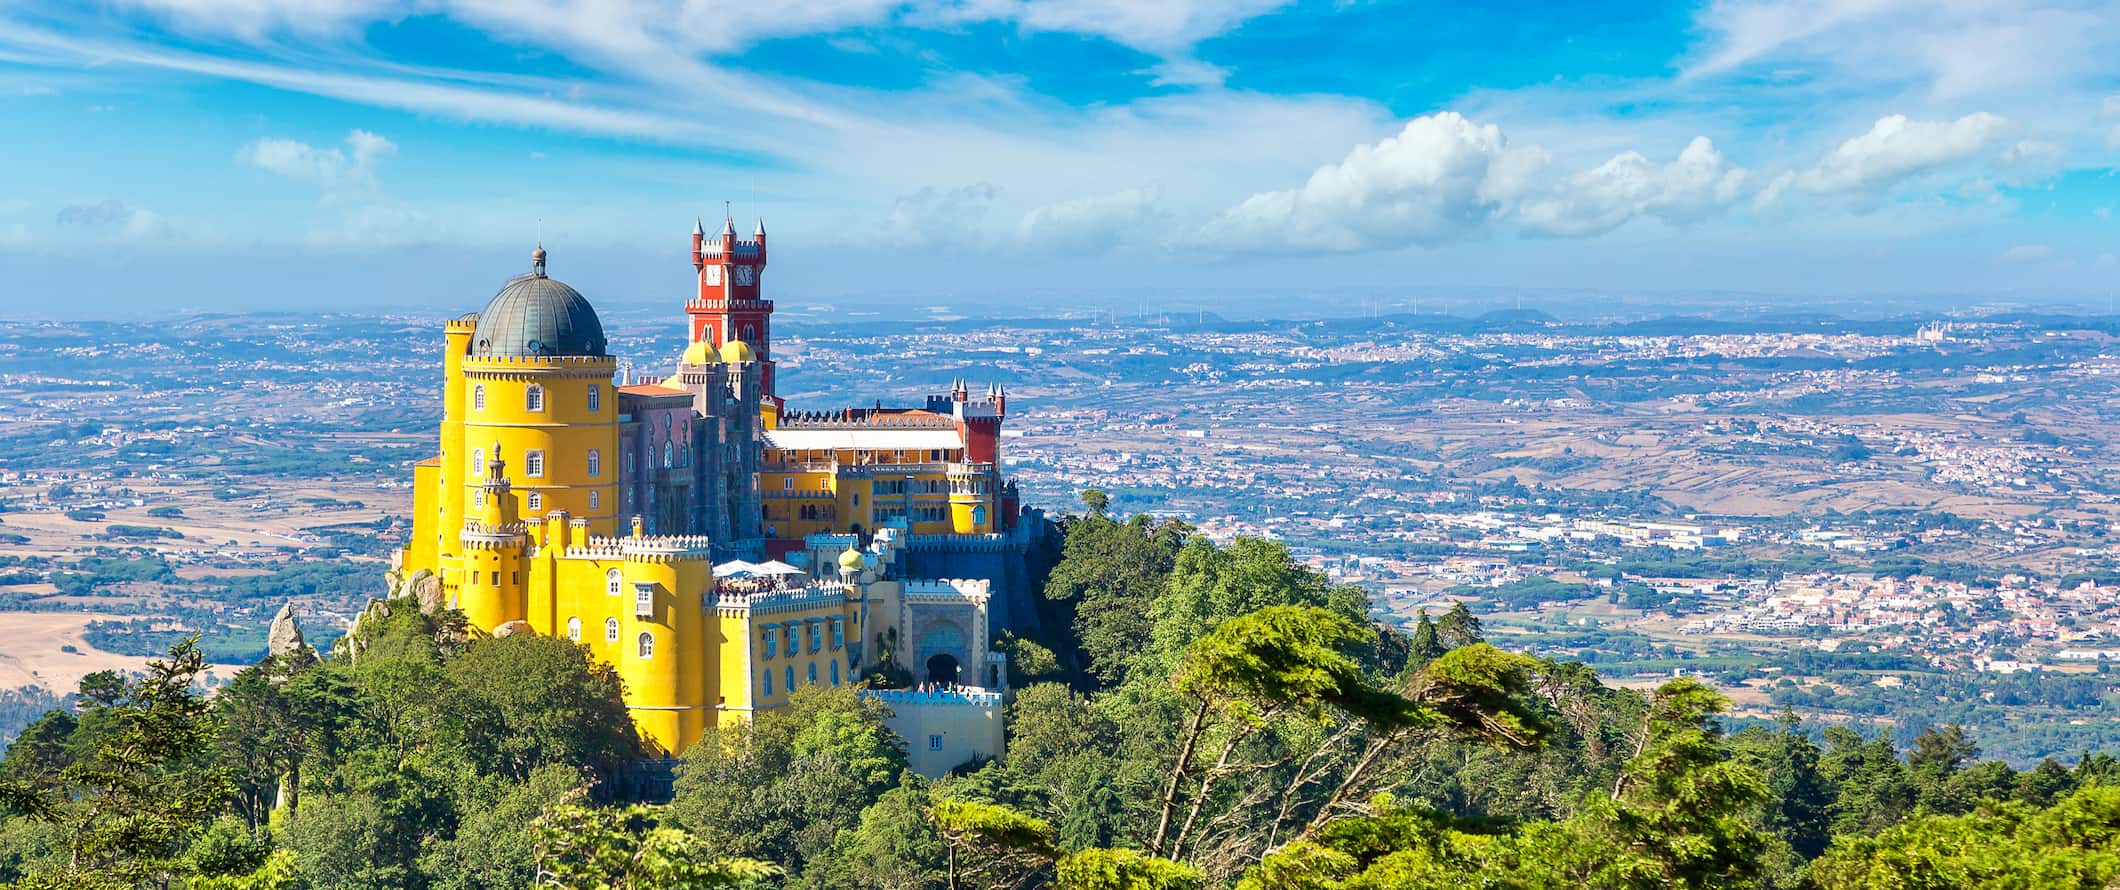 A towering historic building perched on a mountain in Sintra, Portugal